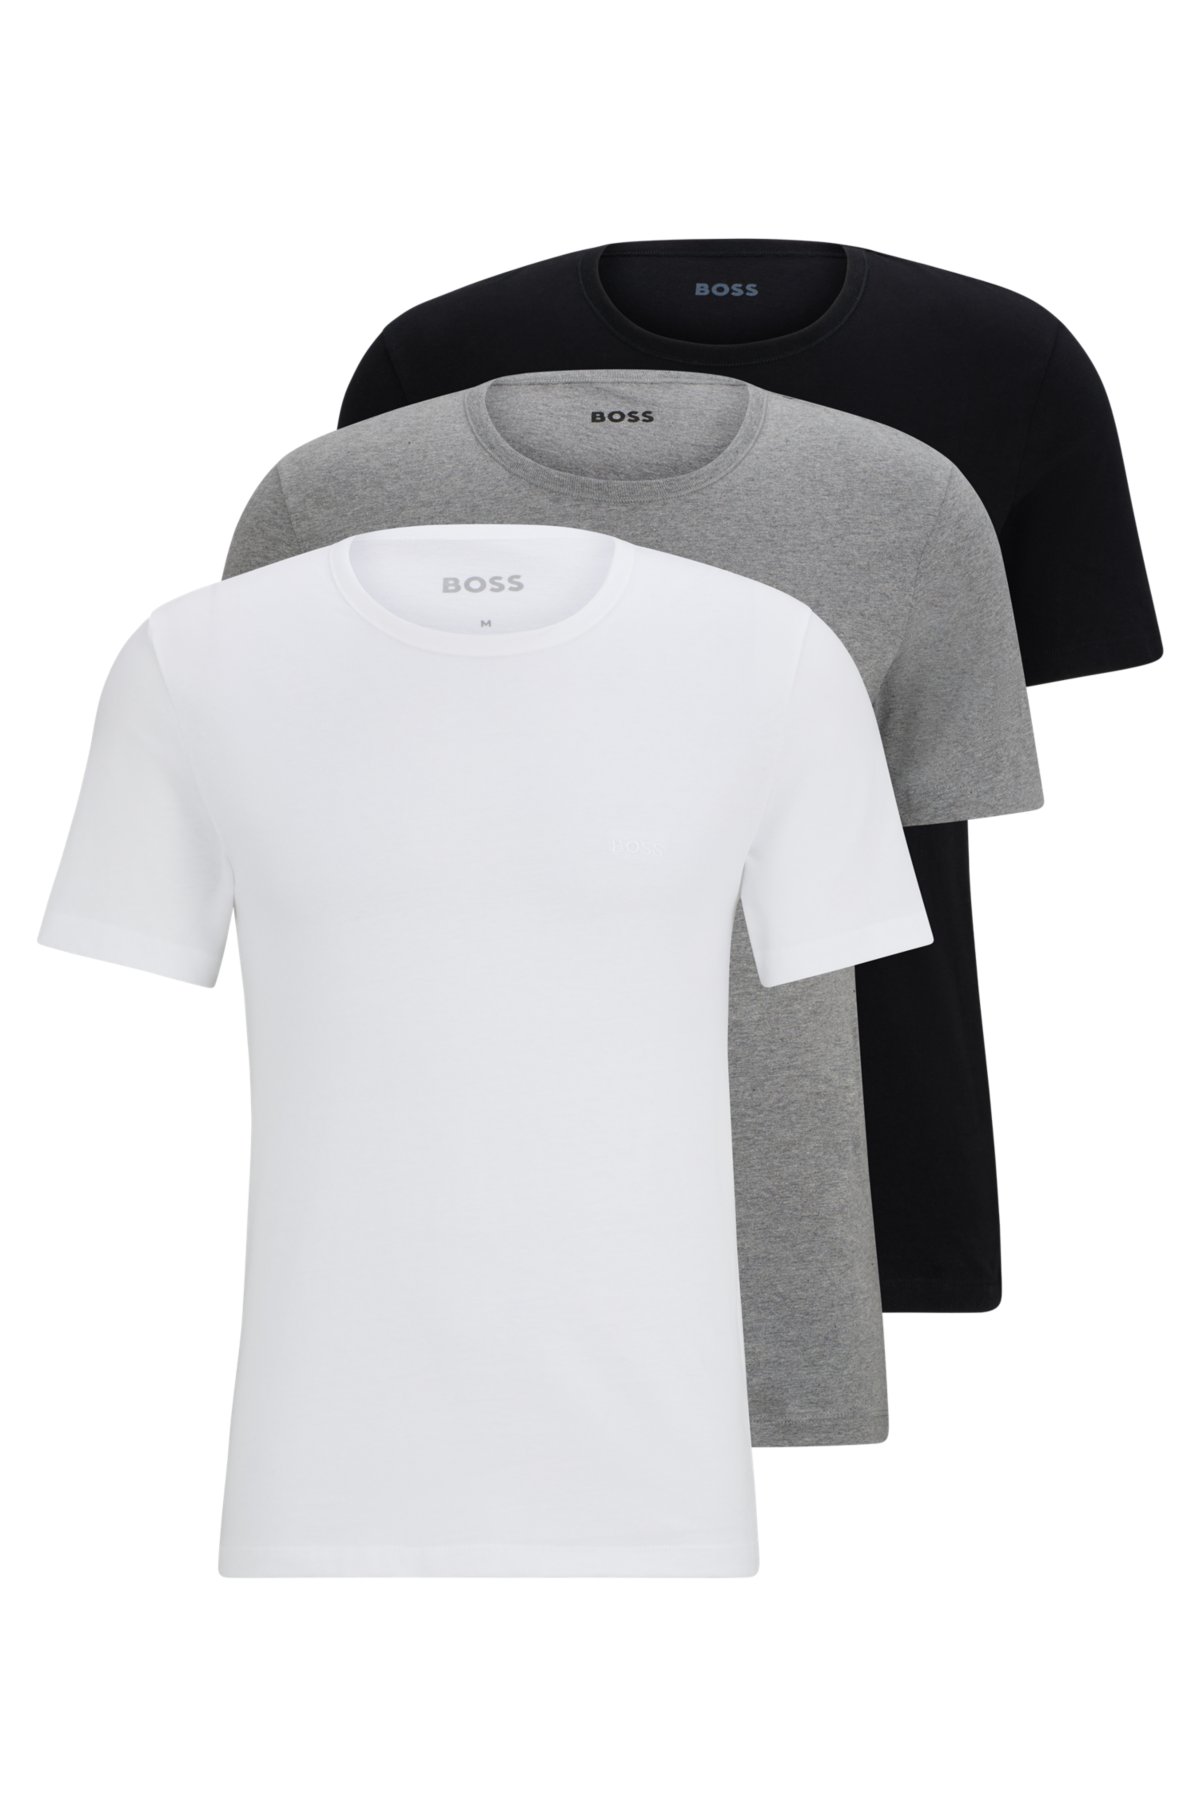 Calvin Klein Men's 3-Pack Classic Crew Neck T-Shirt, White, Small at   Men's Clothing store: Undershirts